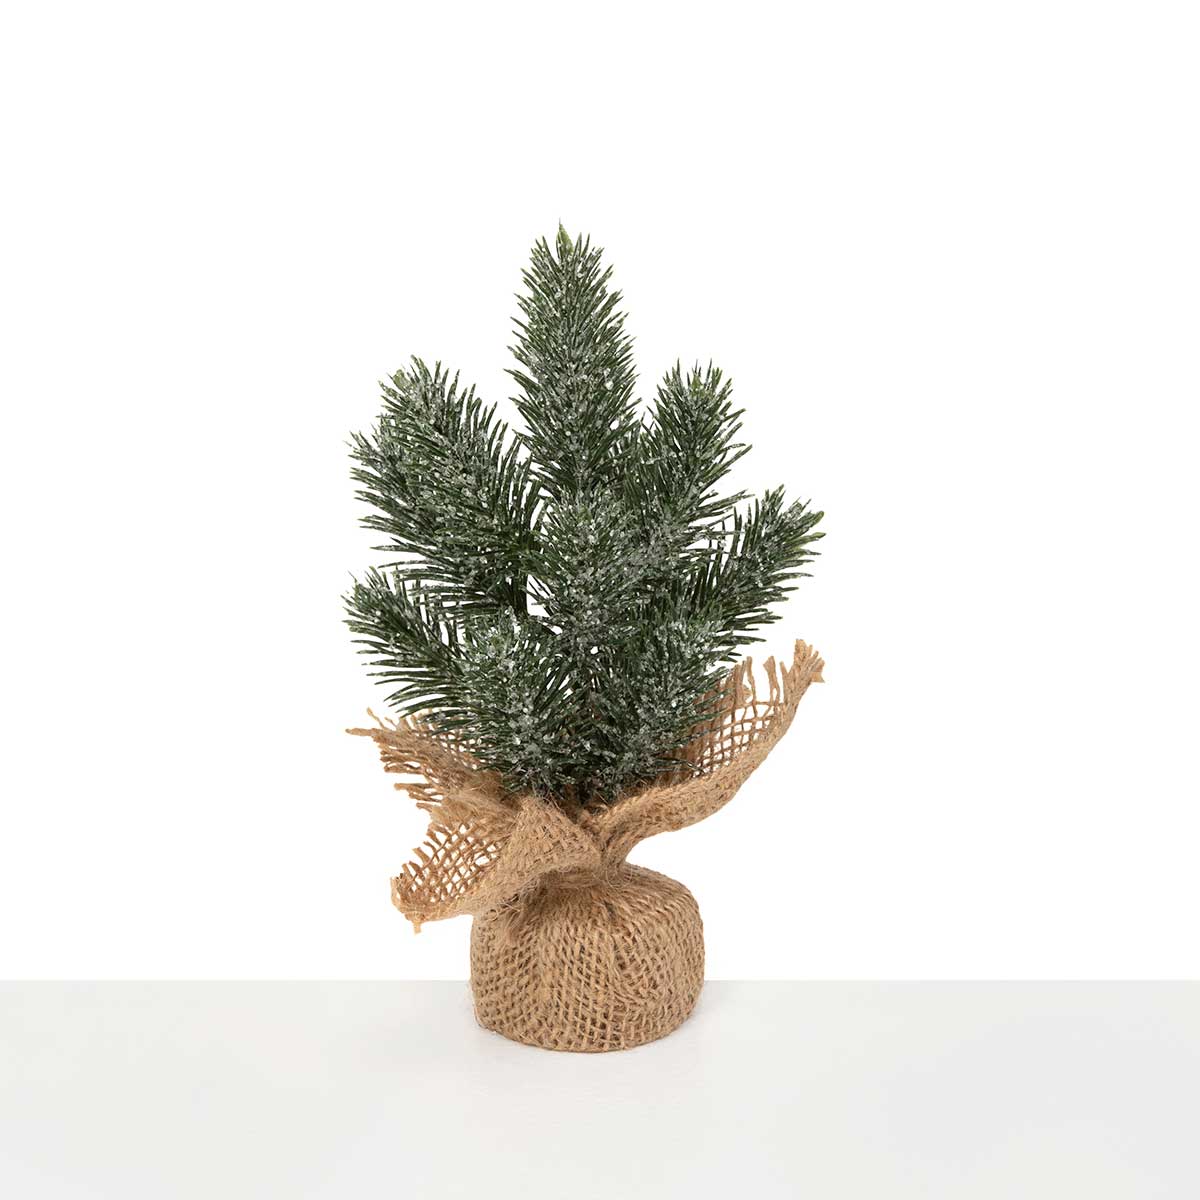 TREE COLORADO NATURAL PINE SMALL 3IN X 8IN GREEN